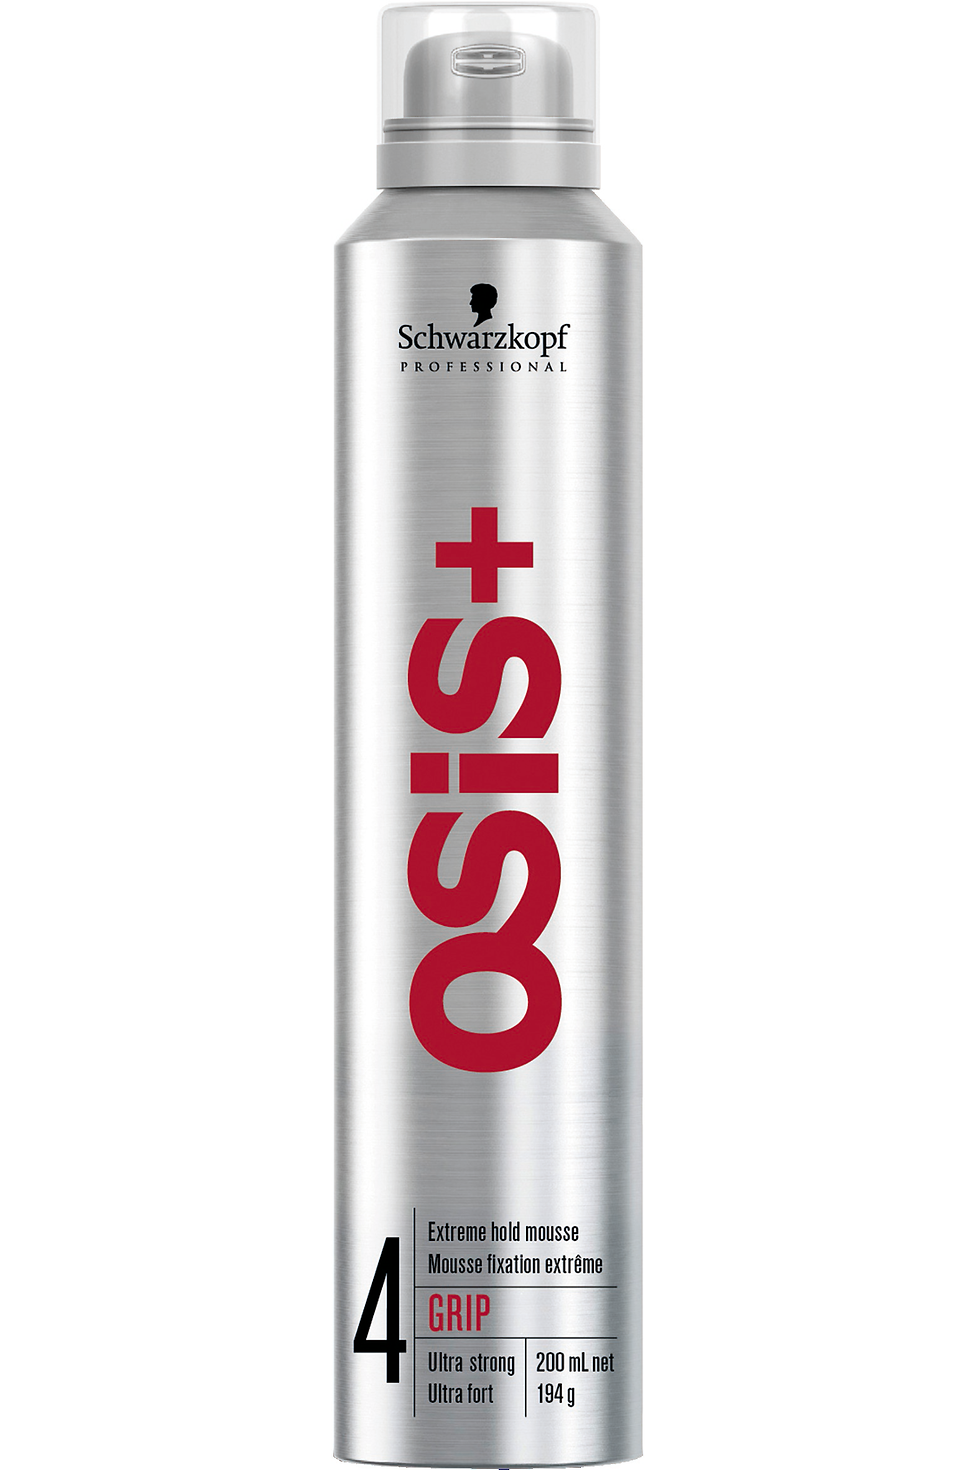 OSiS+ Made to go Higher